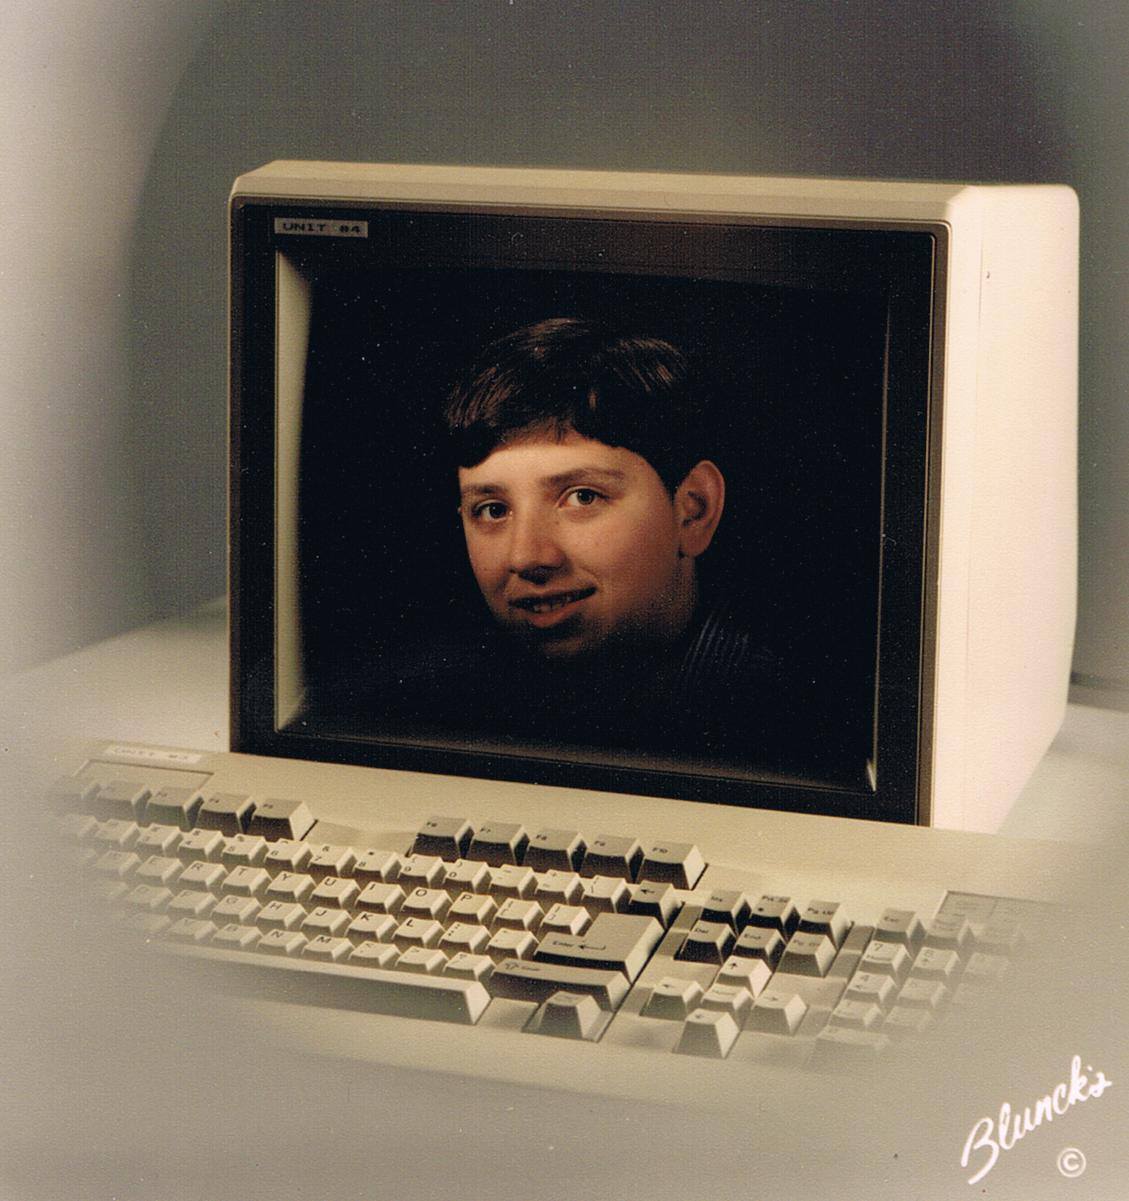 This is a studio photograph from the early 90s where they optically superimposed my face onto a computer monitor because I was always addicted to computers.